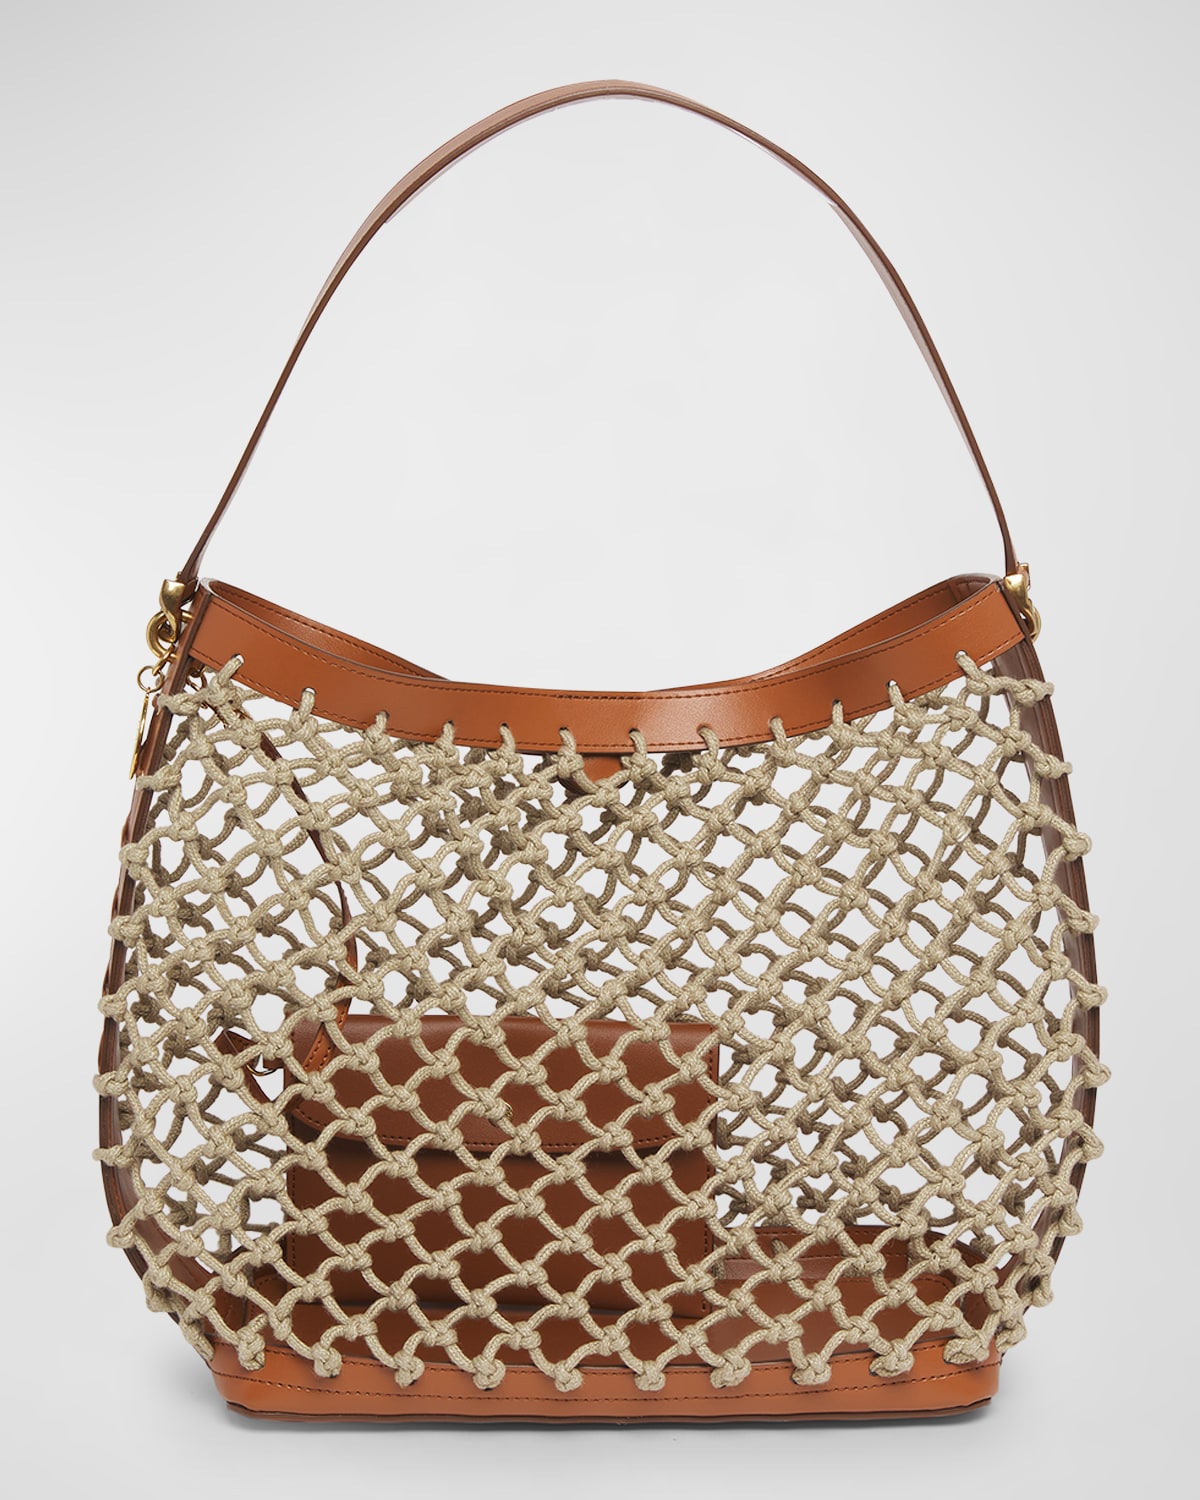 STELLA MCCARTNEY ECO MESH KNOTTED TOTE BAG